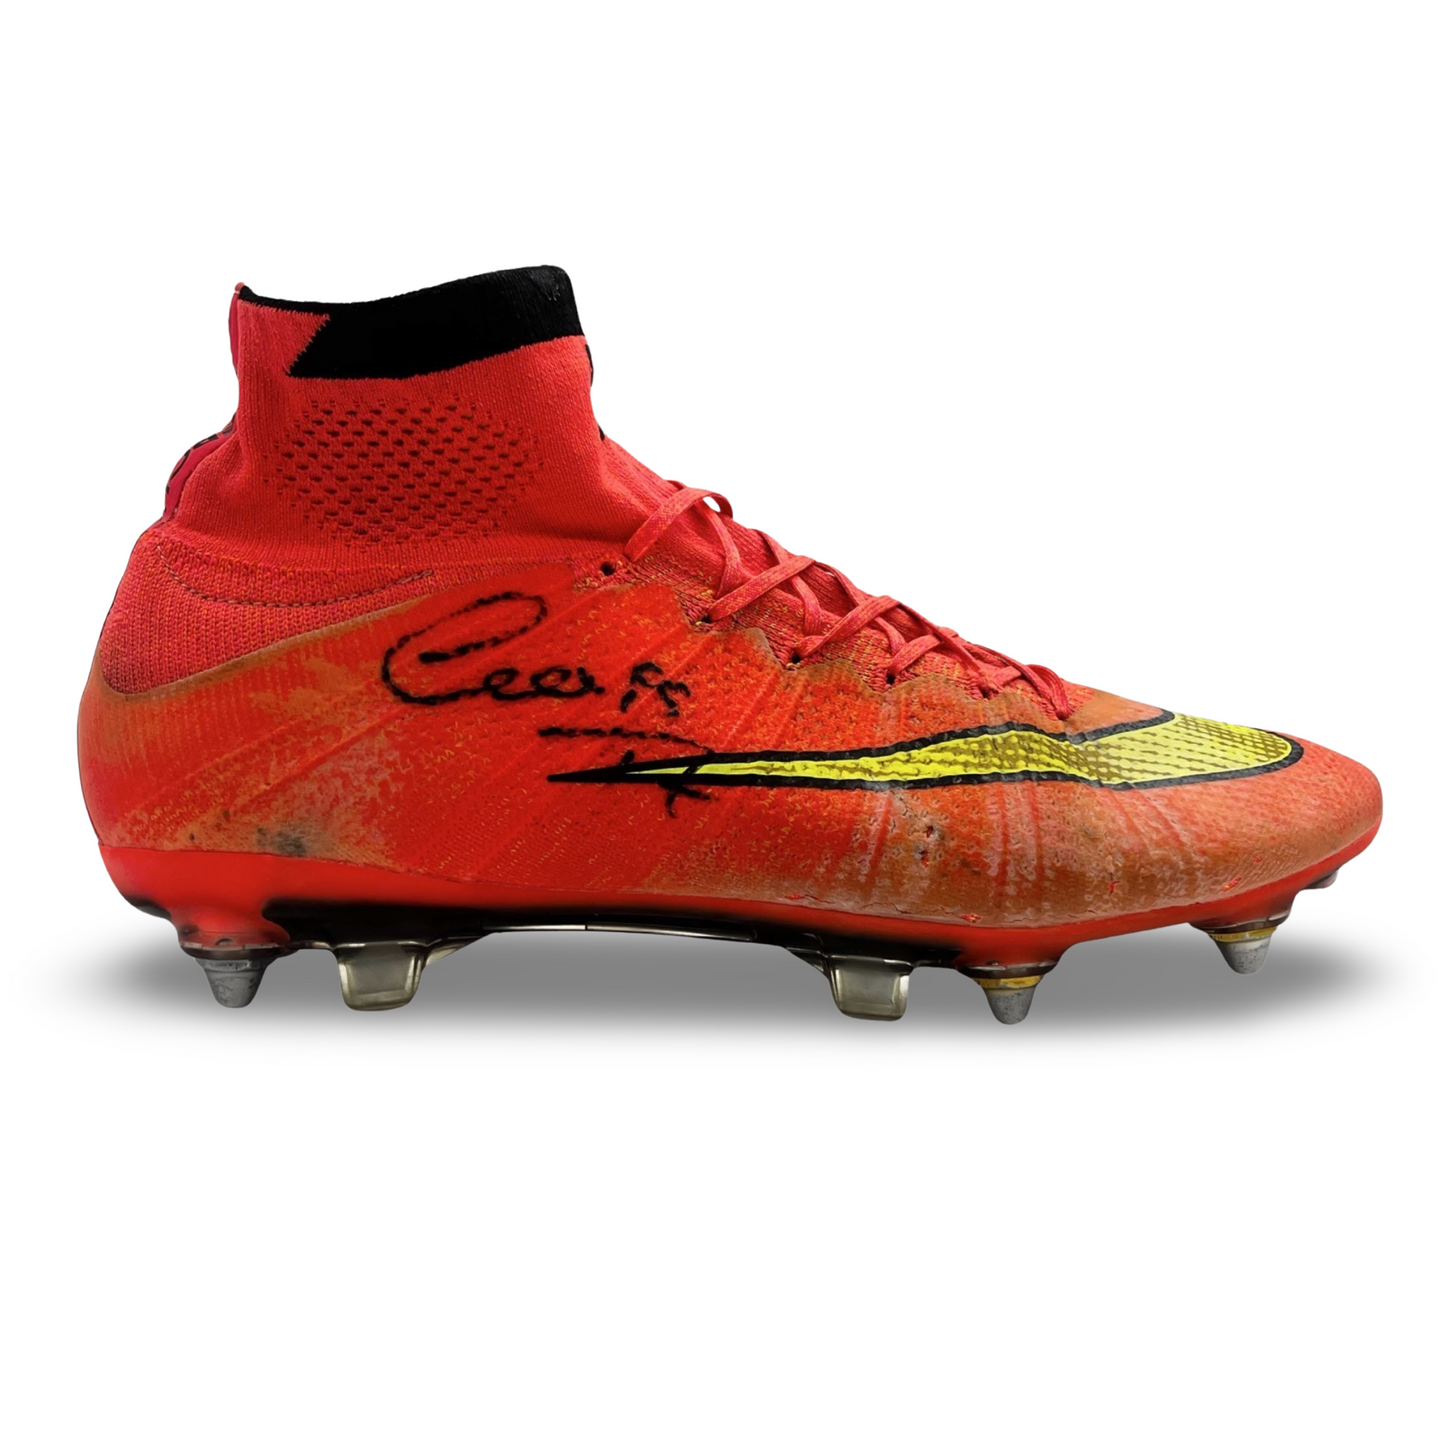 Alexis Sanchez Match Worn Nike Mercurial Superfly IV Signed 2014 FIFA World Cup